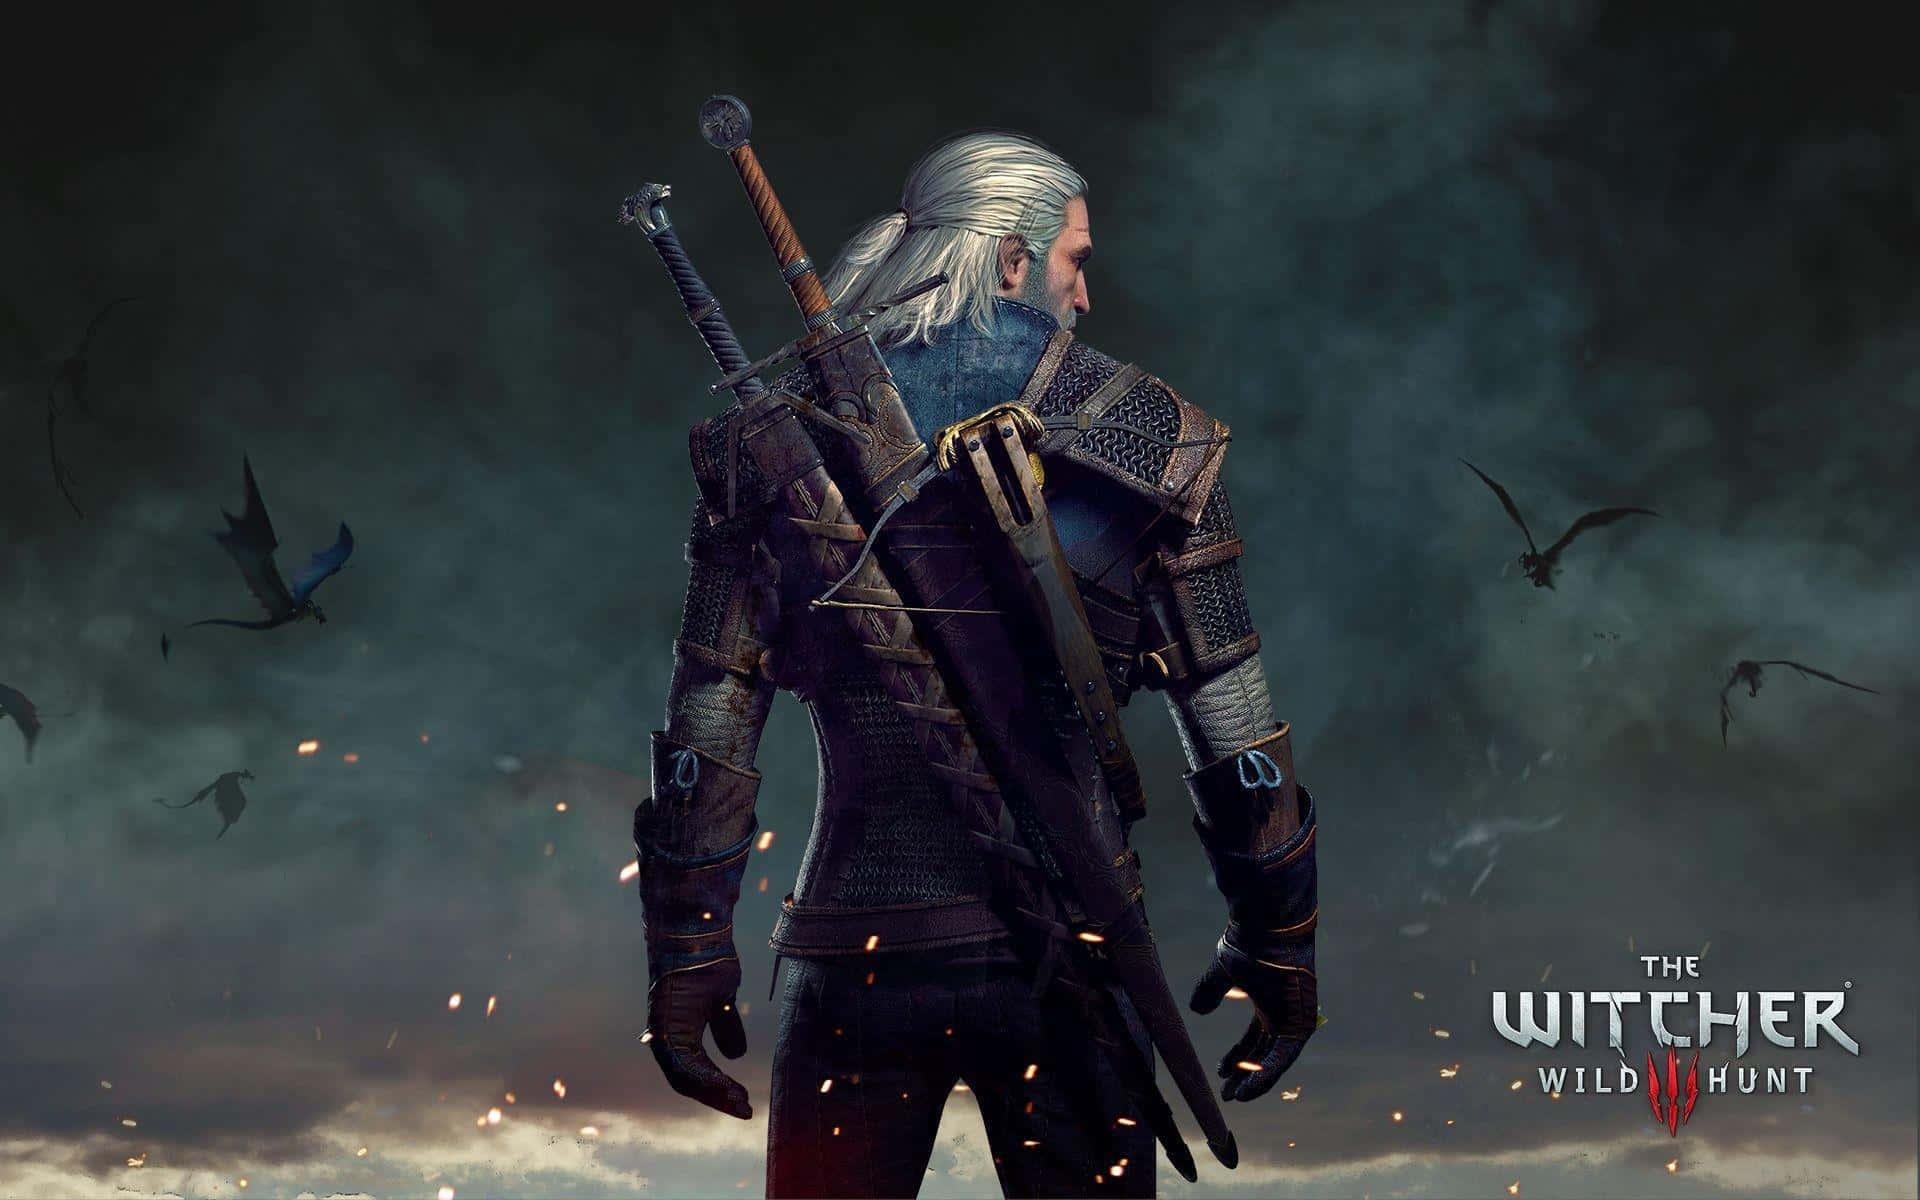 “Go on an Epic Adventure with The Witcher 3: Wild Hunt” Wallpaper